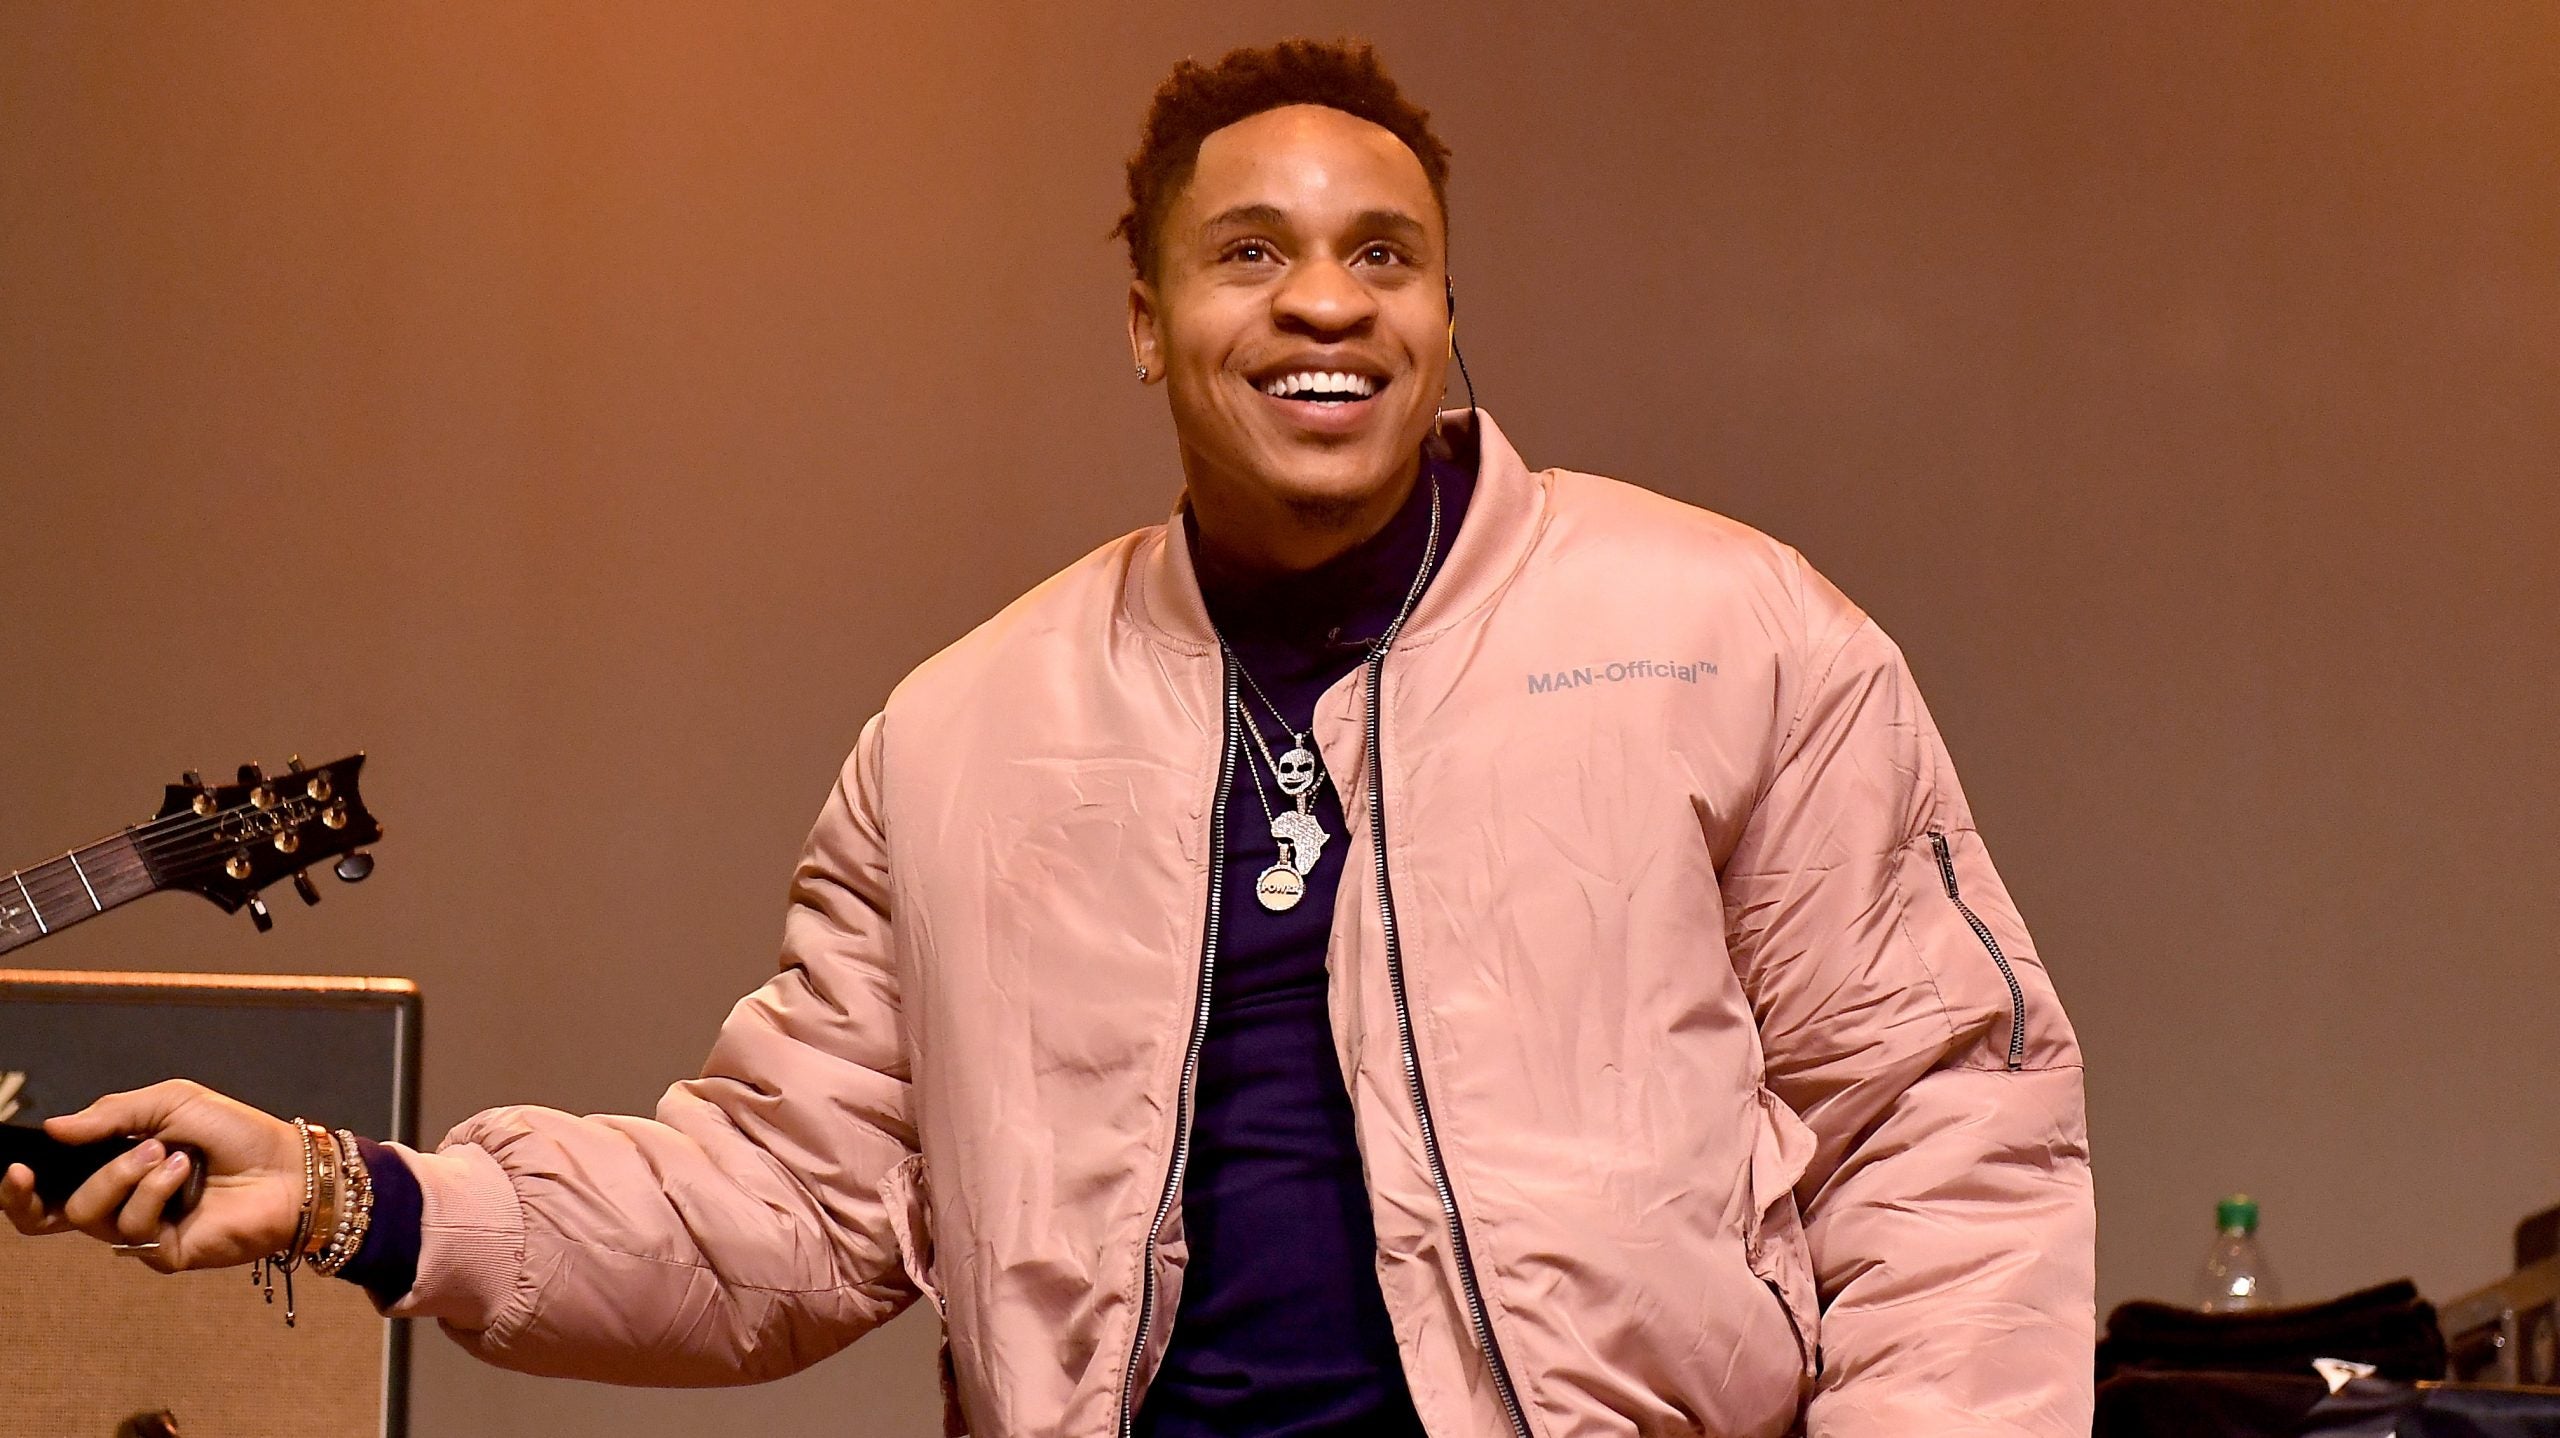 Rotimi Gives A Virtual Performance That Made Our Week for ESSENCE's Music Monday